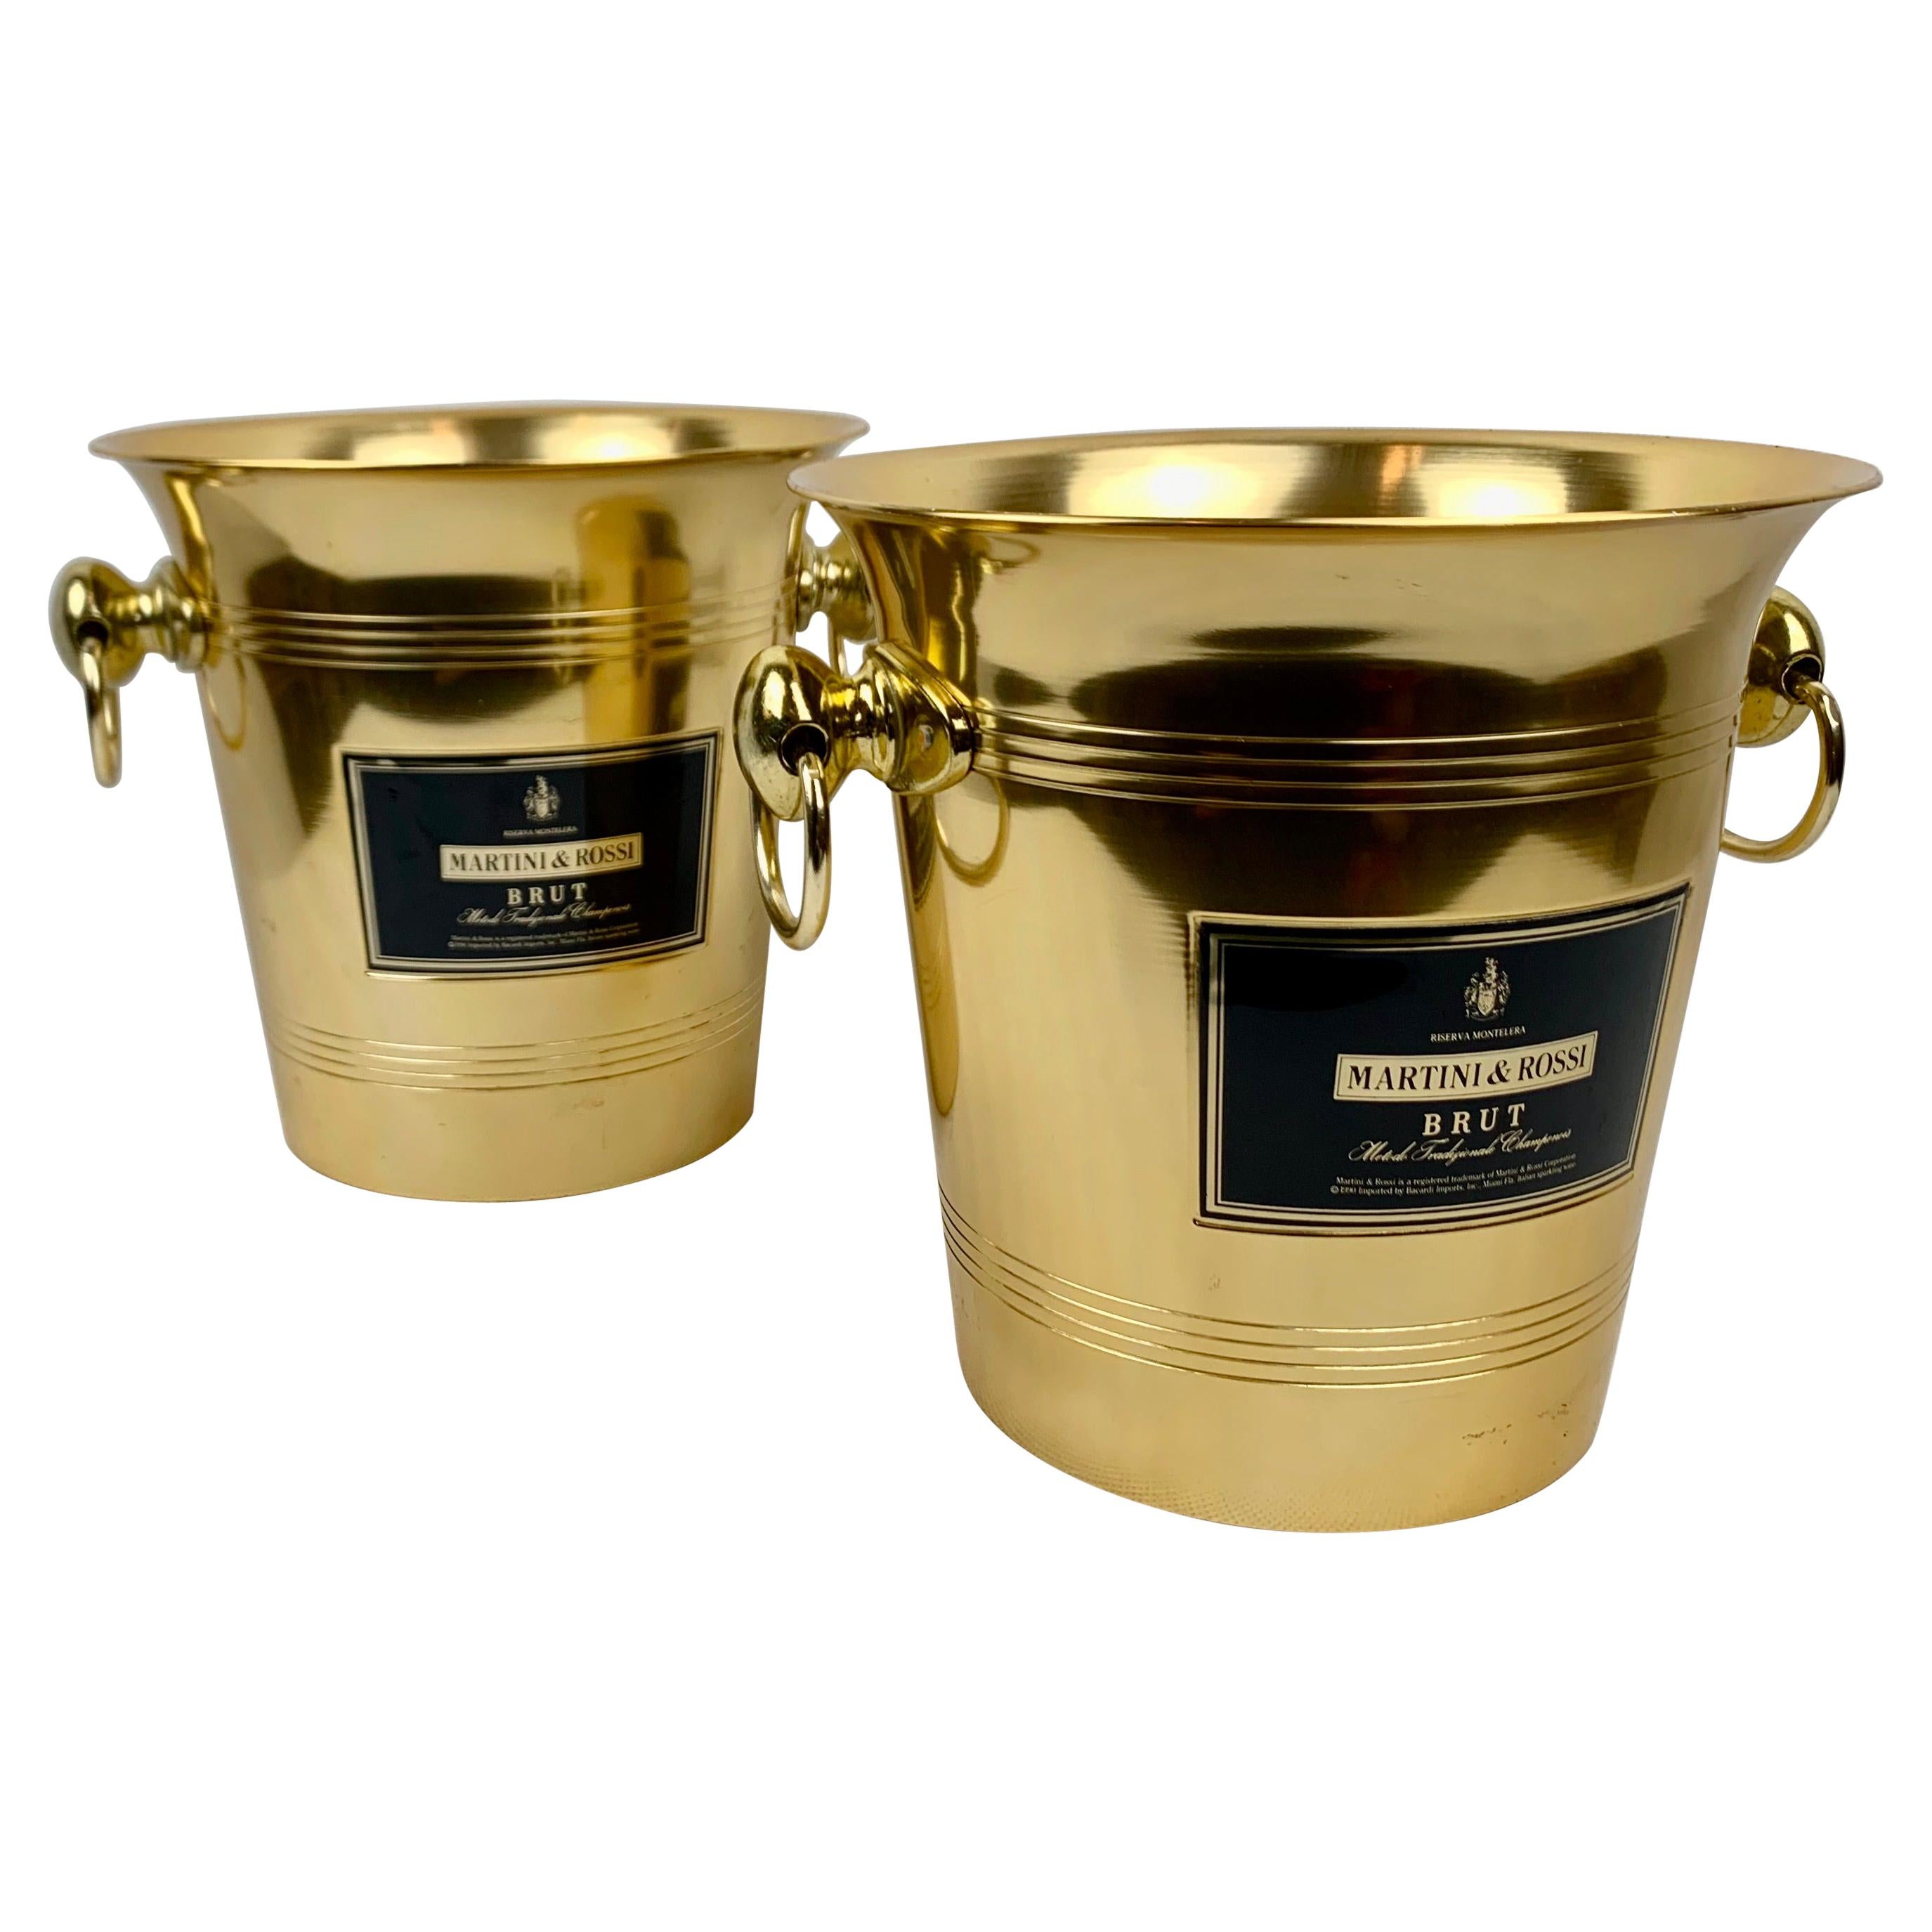 A Pair of Martini & Rossi Golden Champagne Coolers by Vogalu, France, c, 1990